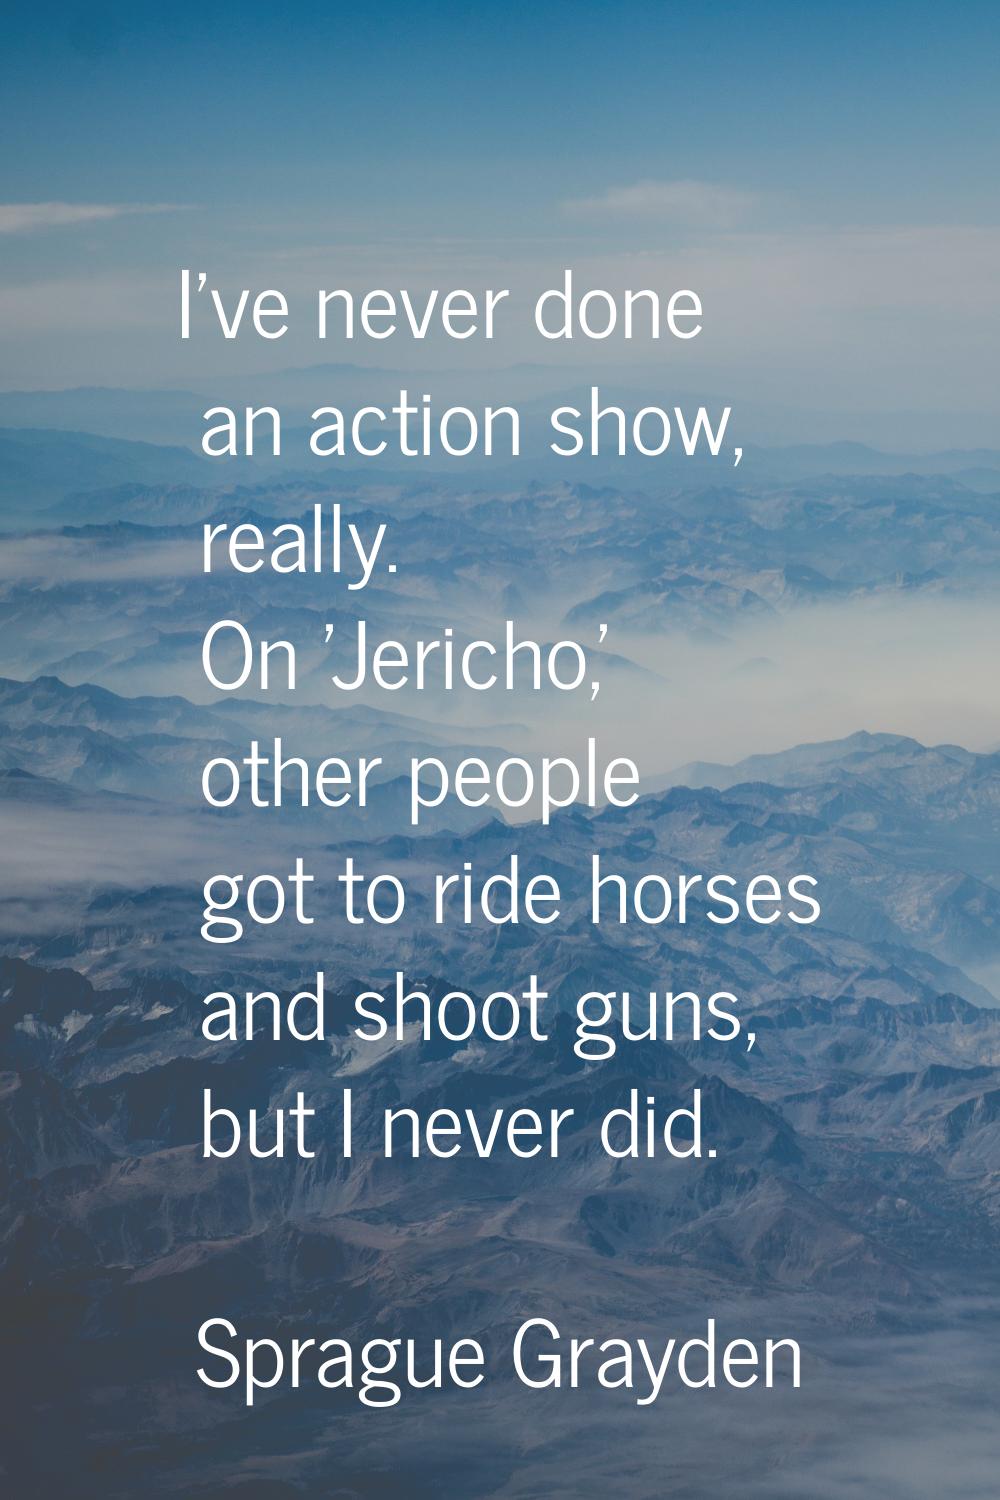 I've never done an action show, really. On 'Jericho,' other people got to ride horses and shoot gun